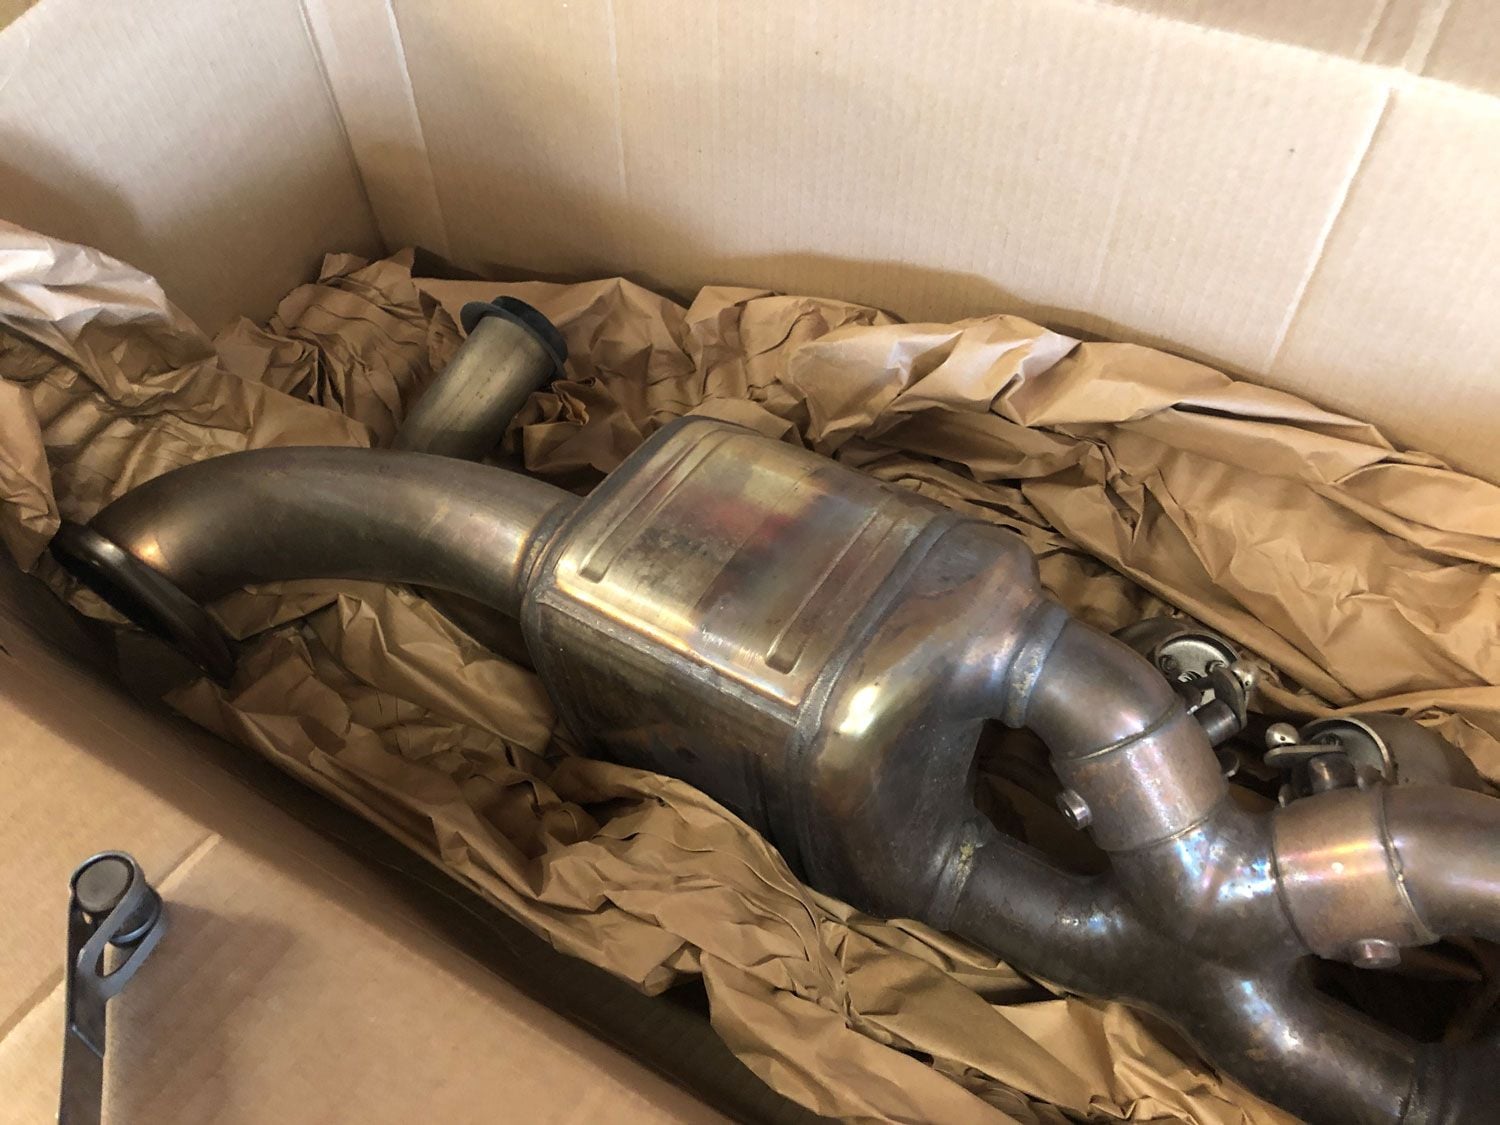 Engine - Exhaust - Porsche 991 Factory Sport Exhaust: $650 - Used - 2012 to 2018 Porsche 911 - Brookhaven, NY 11719, United States